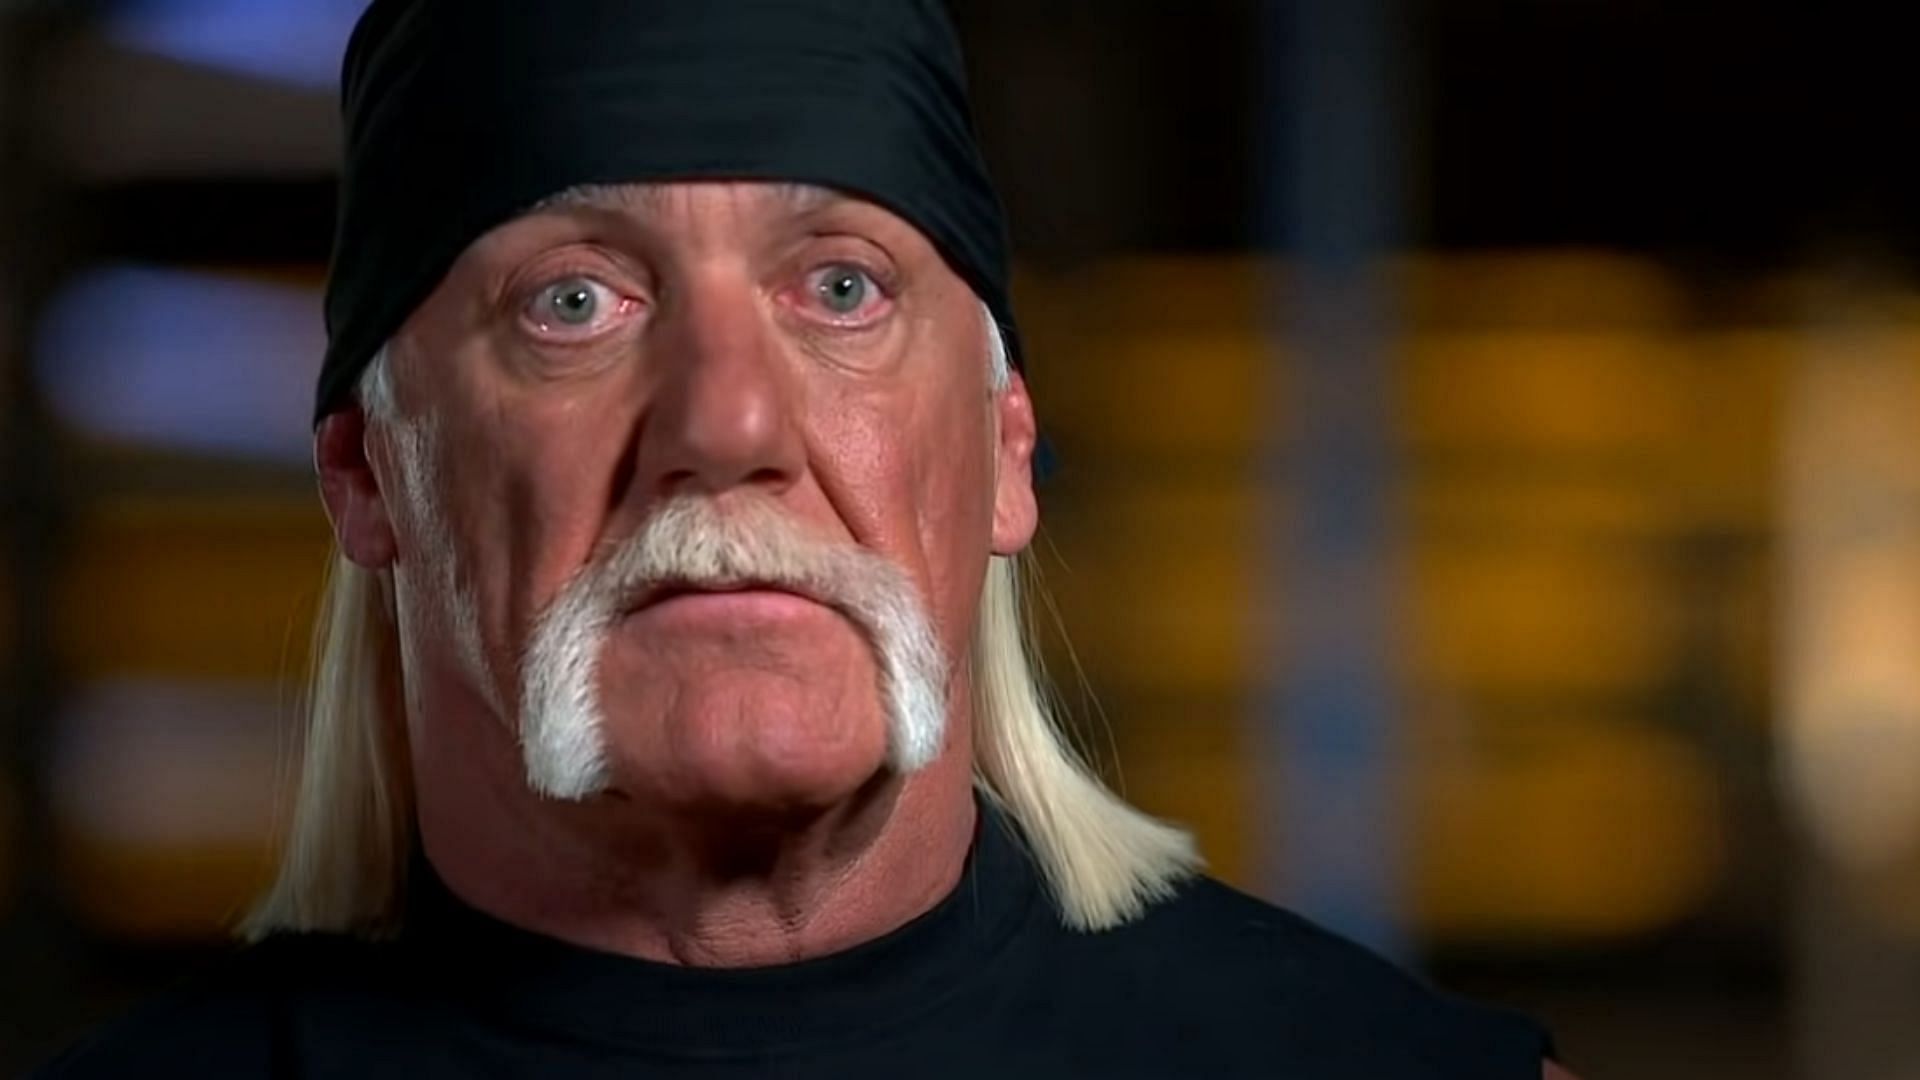 Hulk Hogan has made some real-life enemies over the years